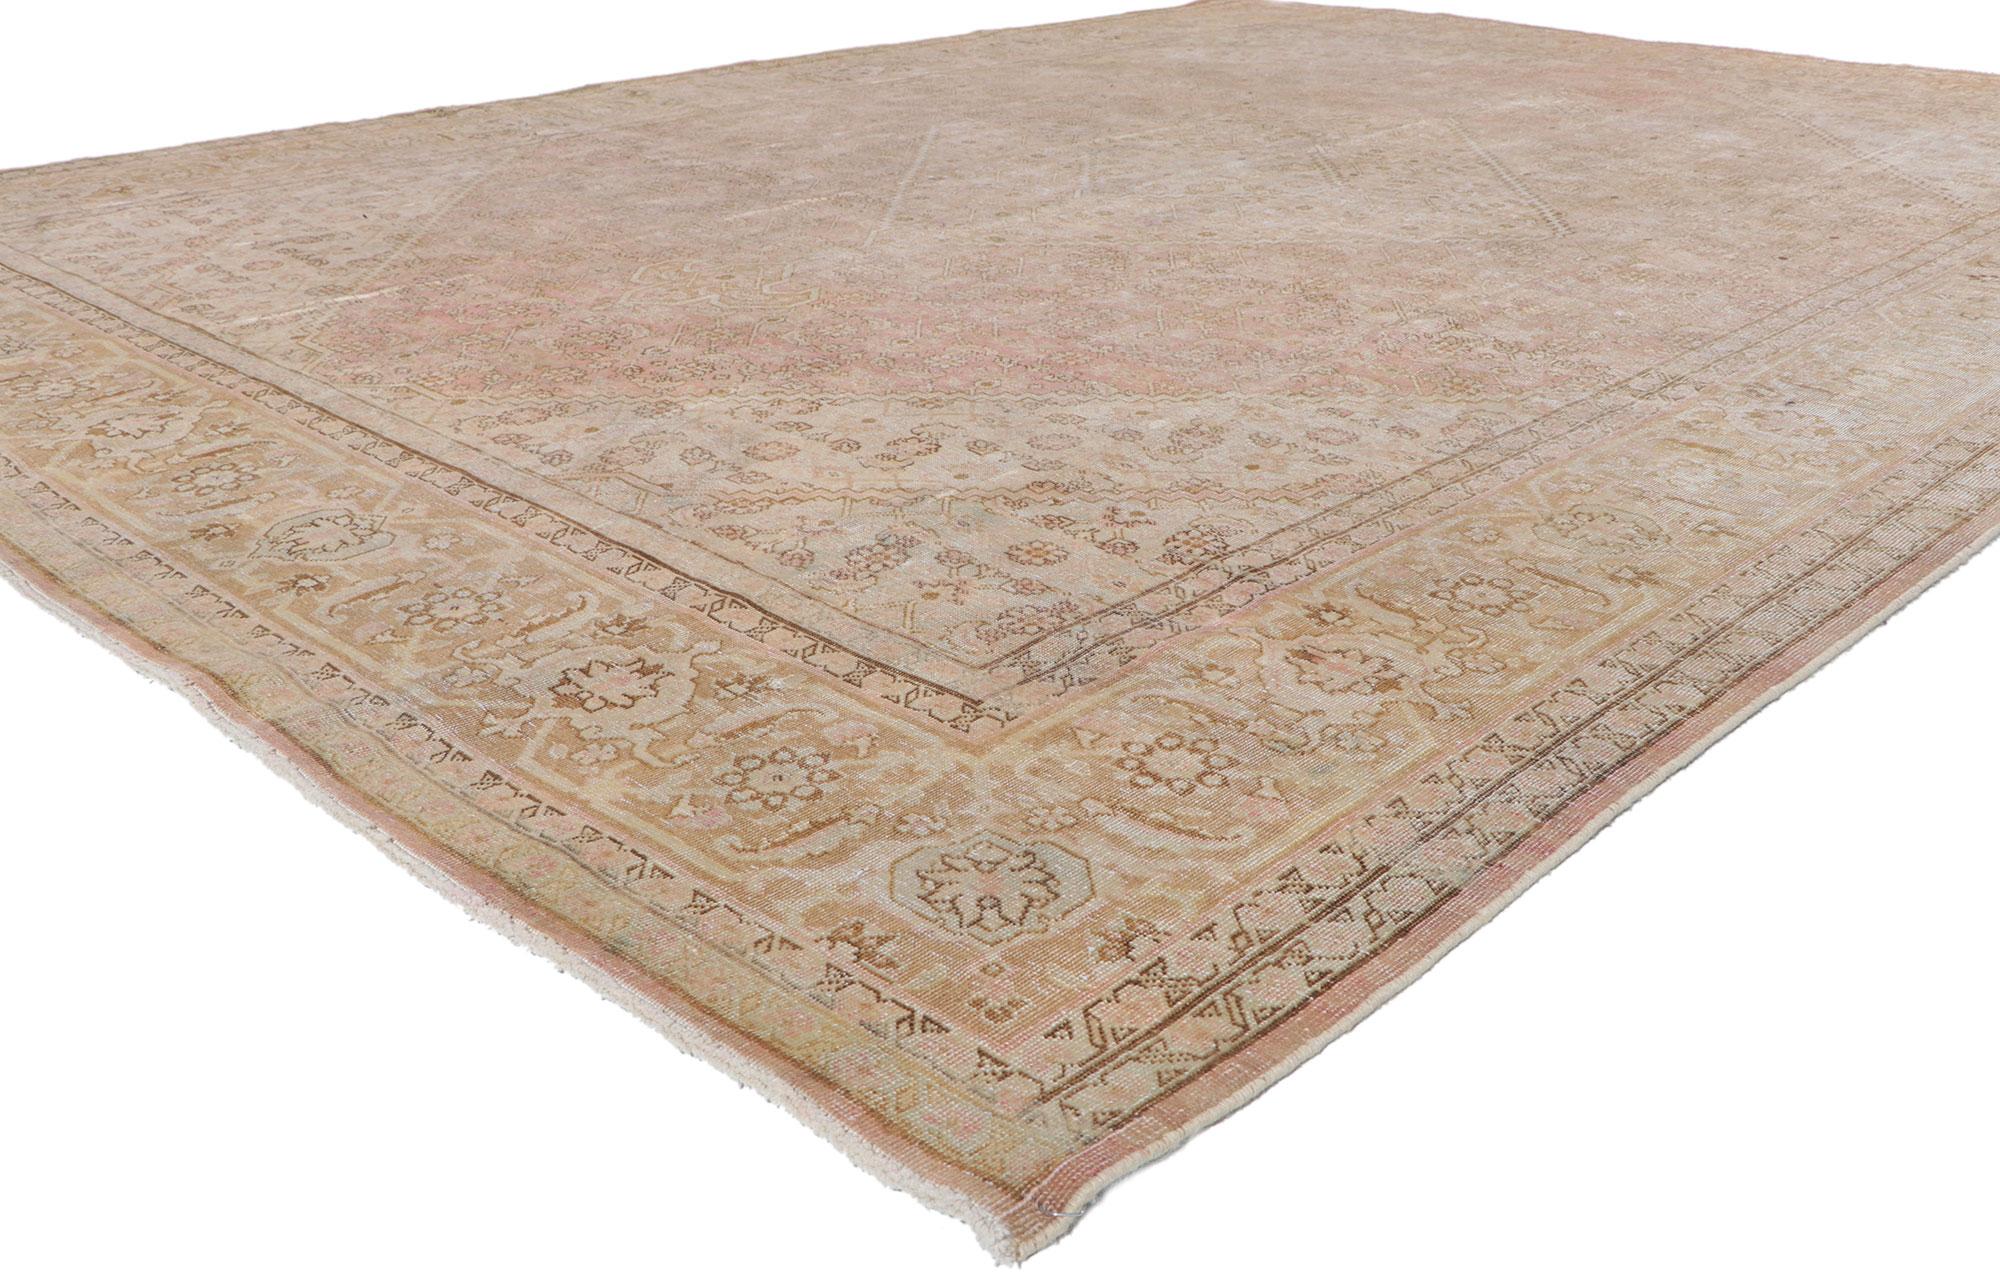 61103 Distressed Antique Persian Tabriz Rug, 08'10 x 09'10.

Discover the perfect union of weathered finesse and laid-back luxury in this hand-knotted wool distressed antique Persian Tabriz rug. Embracing the essence of rustic simplicity, the faded